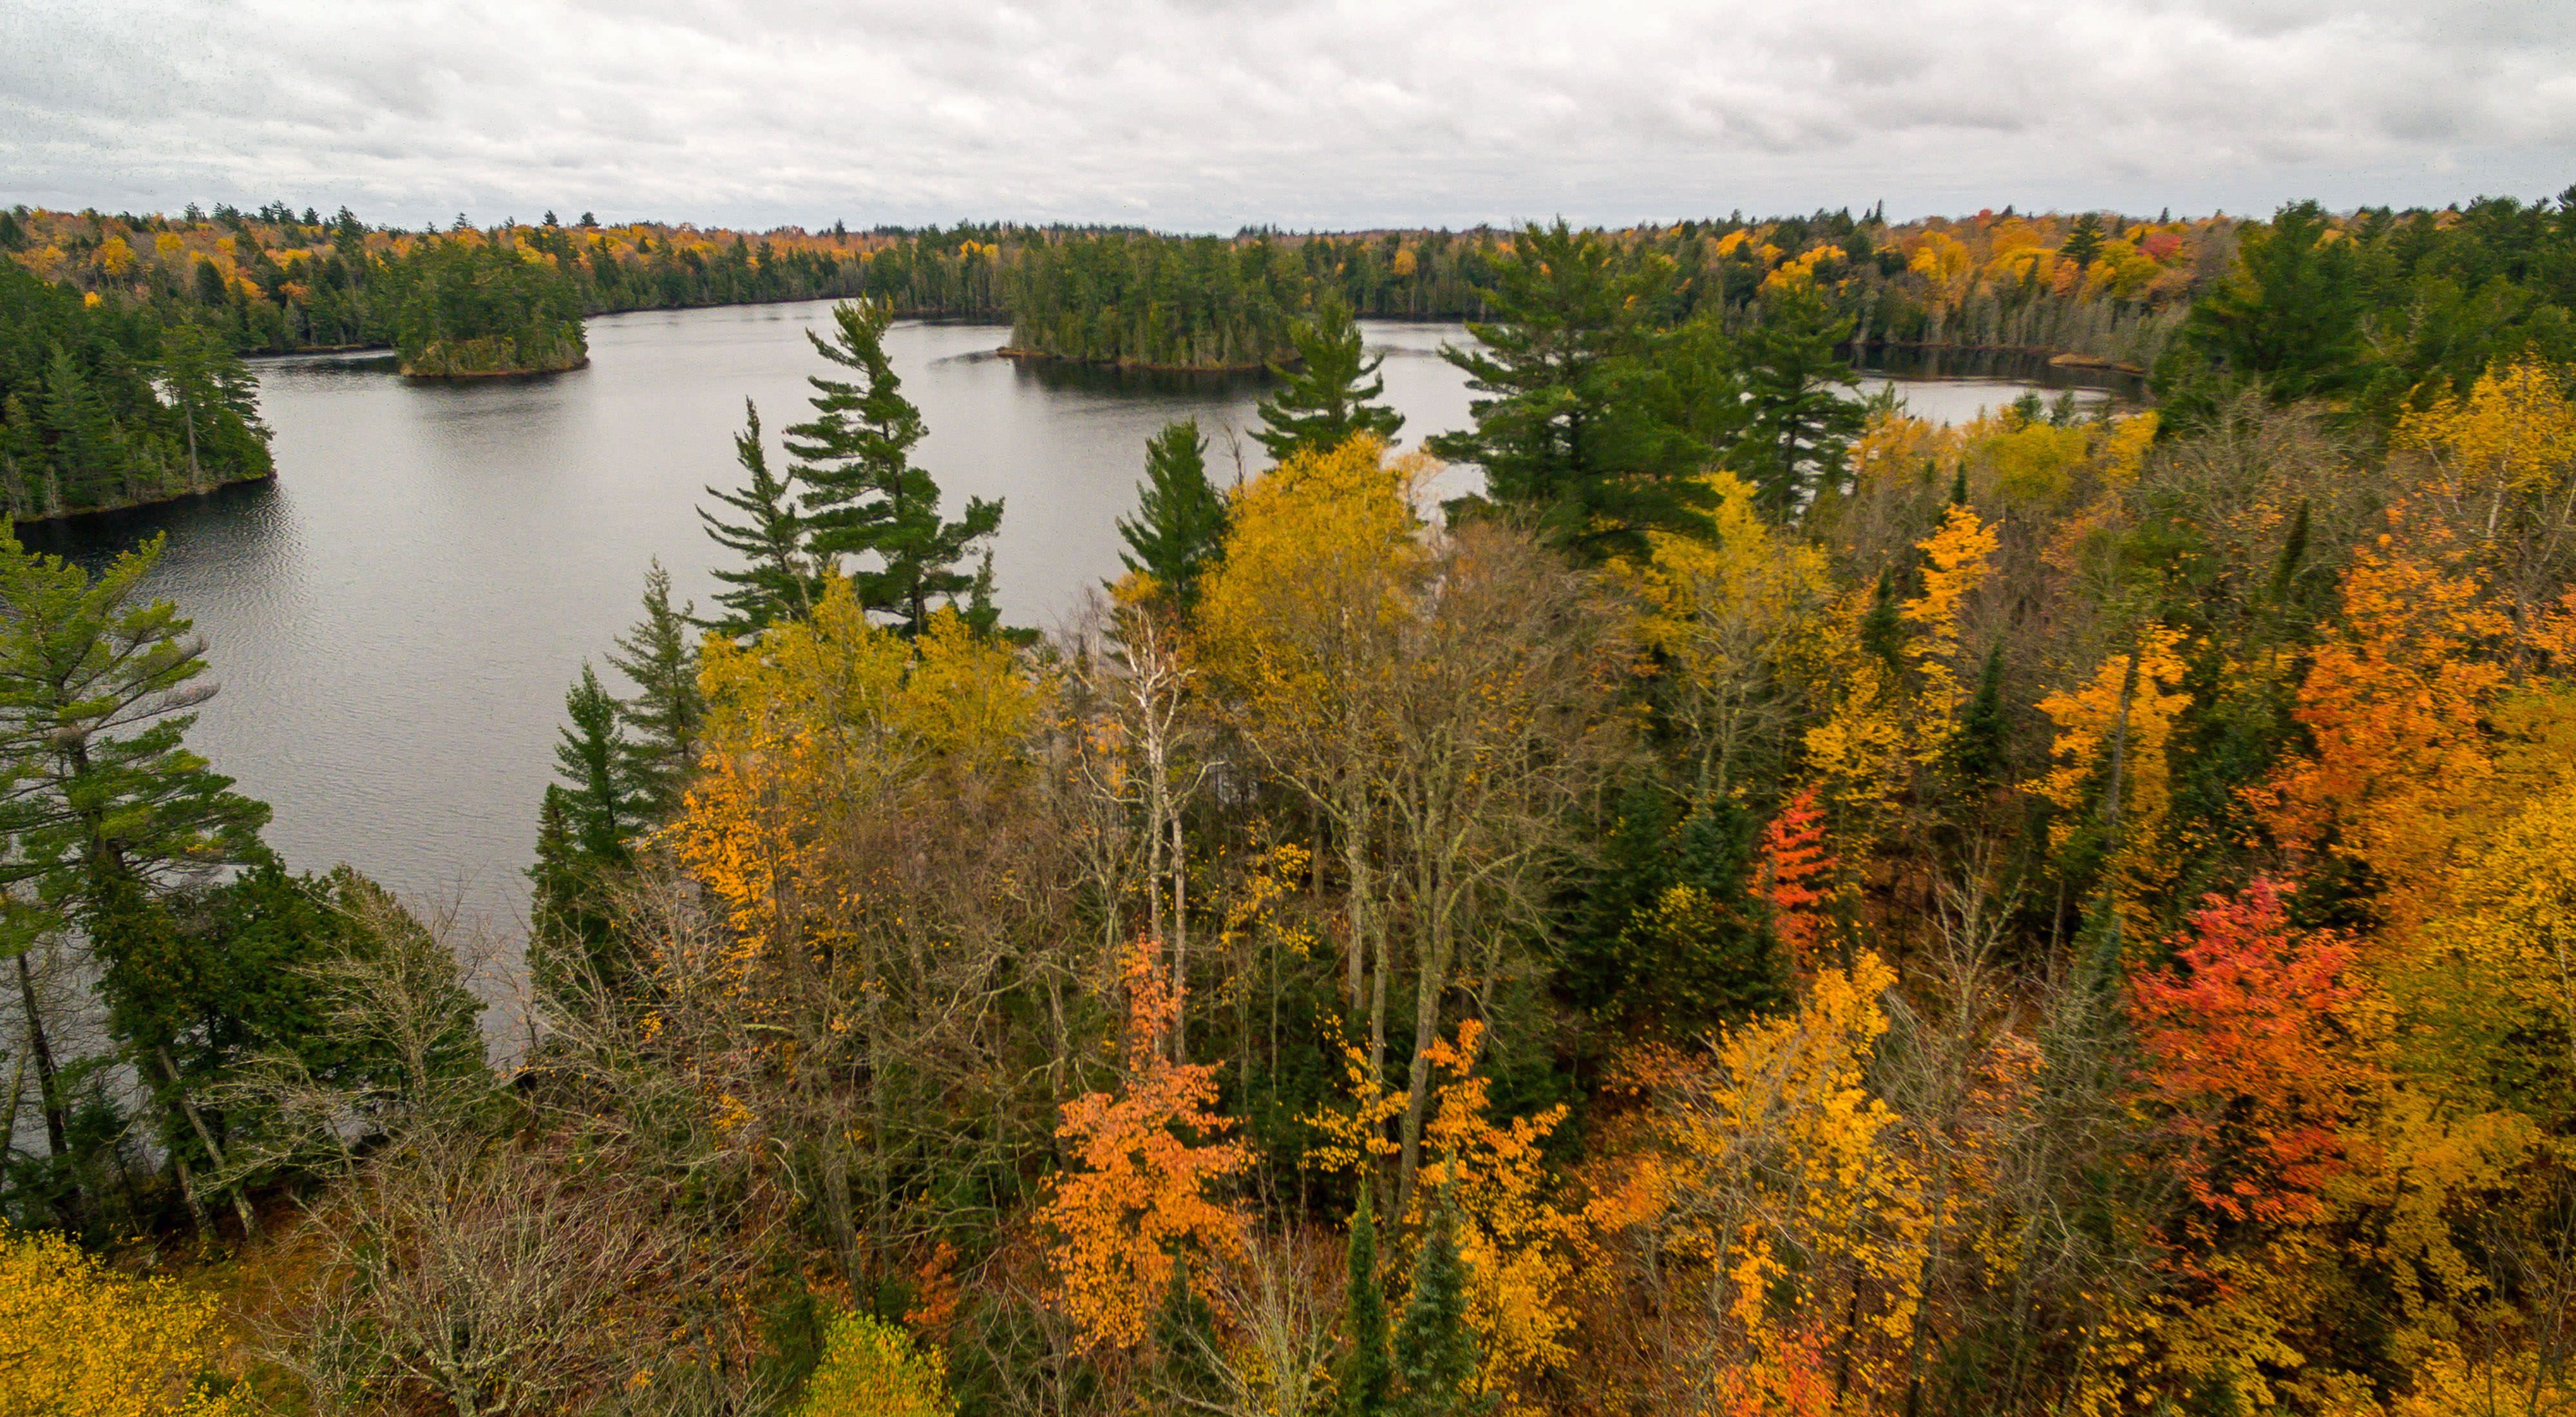 A lake lines with trees showing fall colors, with small forested islands dotting the lake.